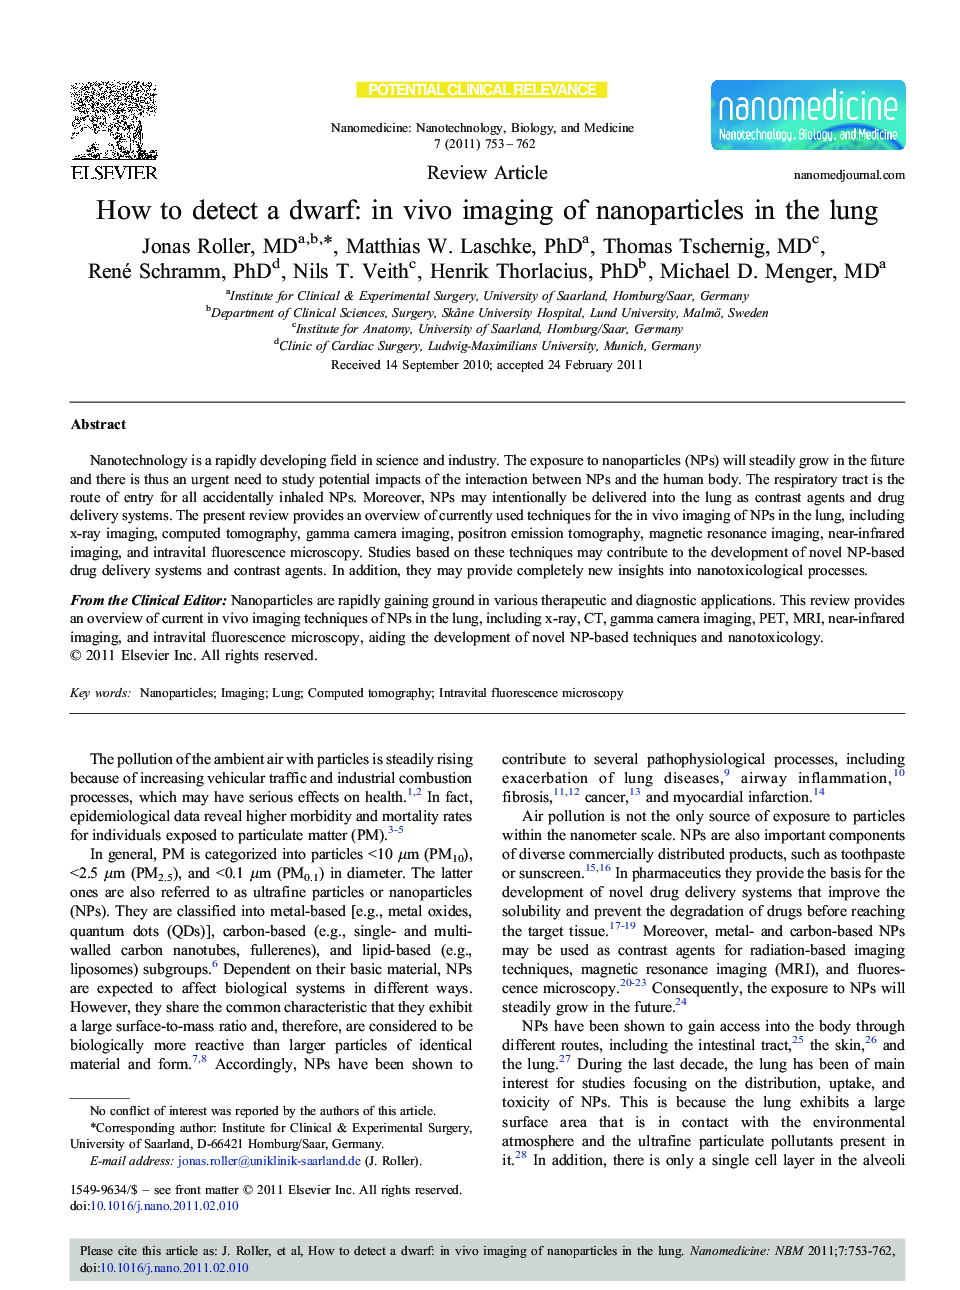 How to detect a dwarf: in vivo imaging of nanoparticles in the lung